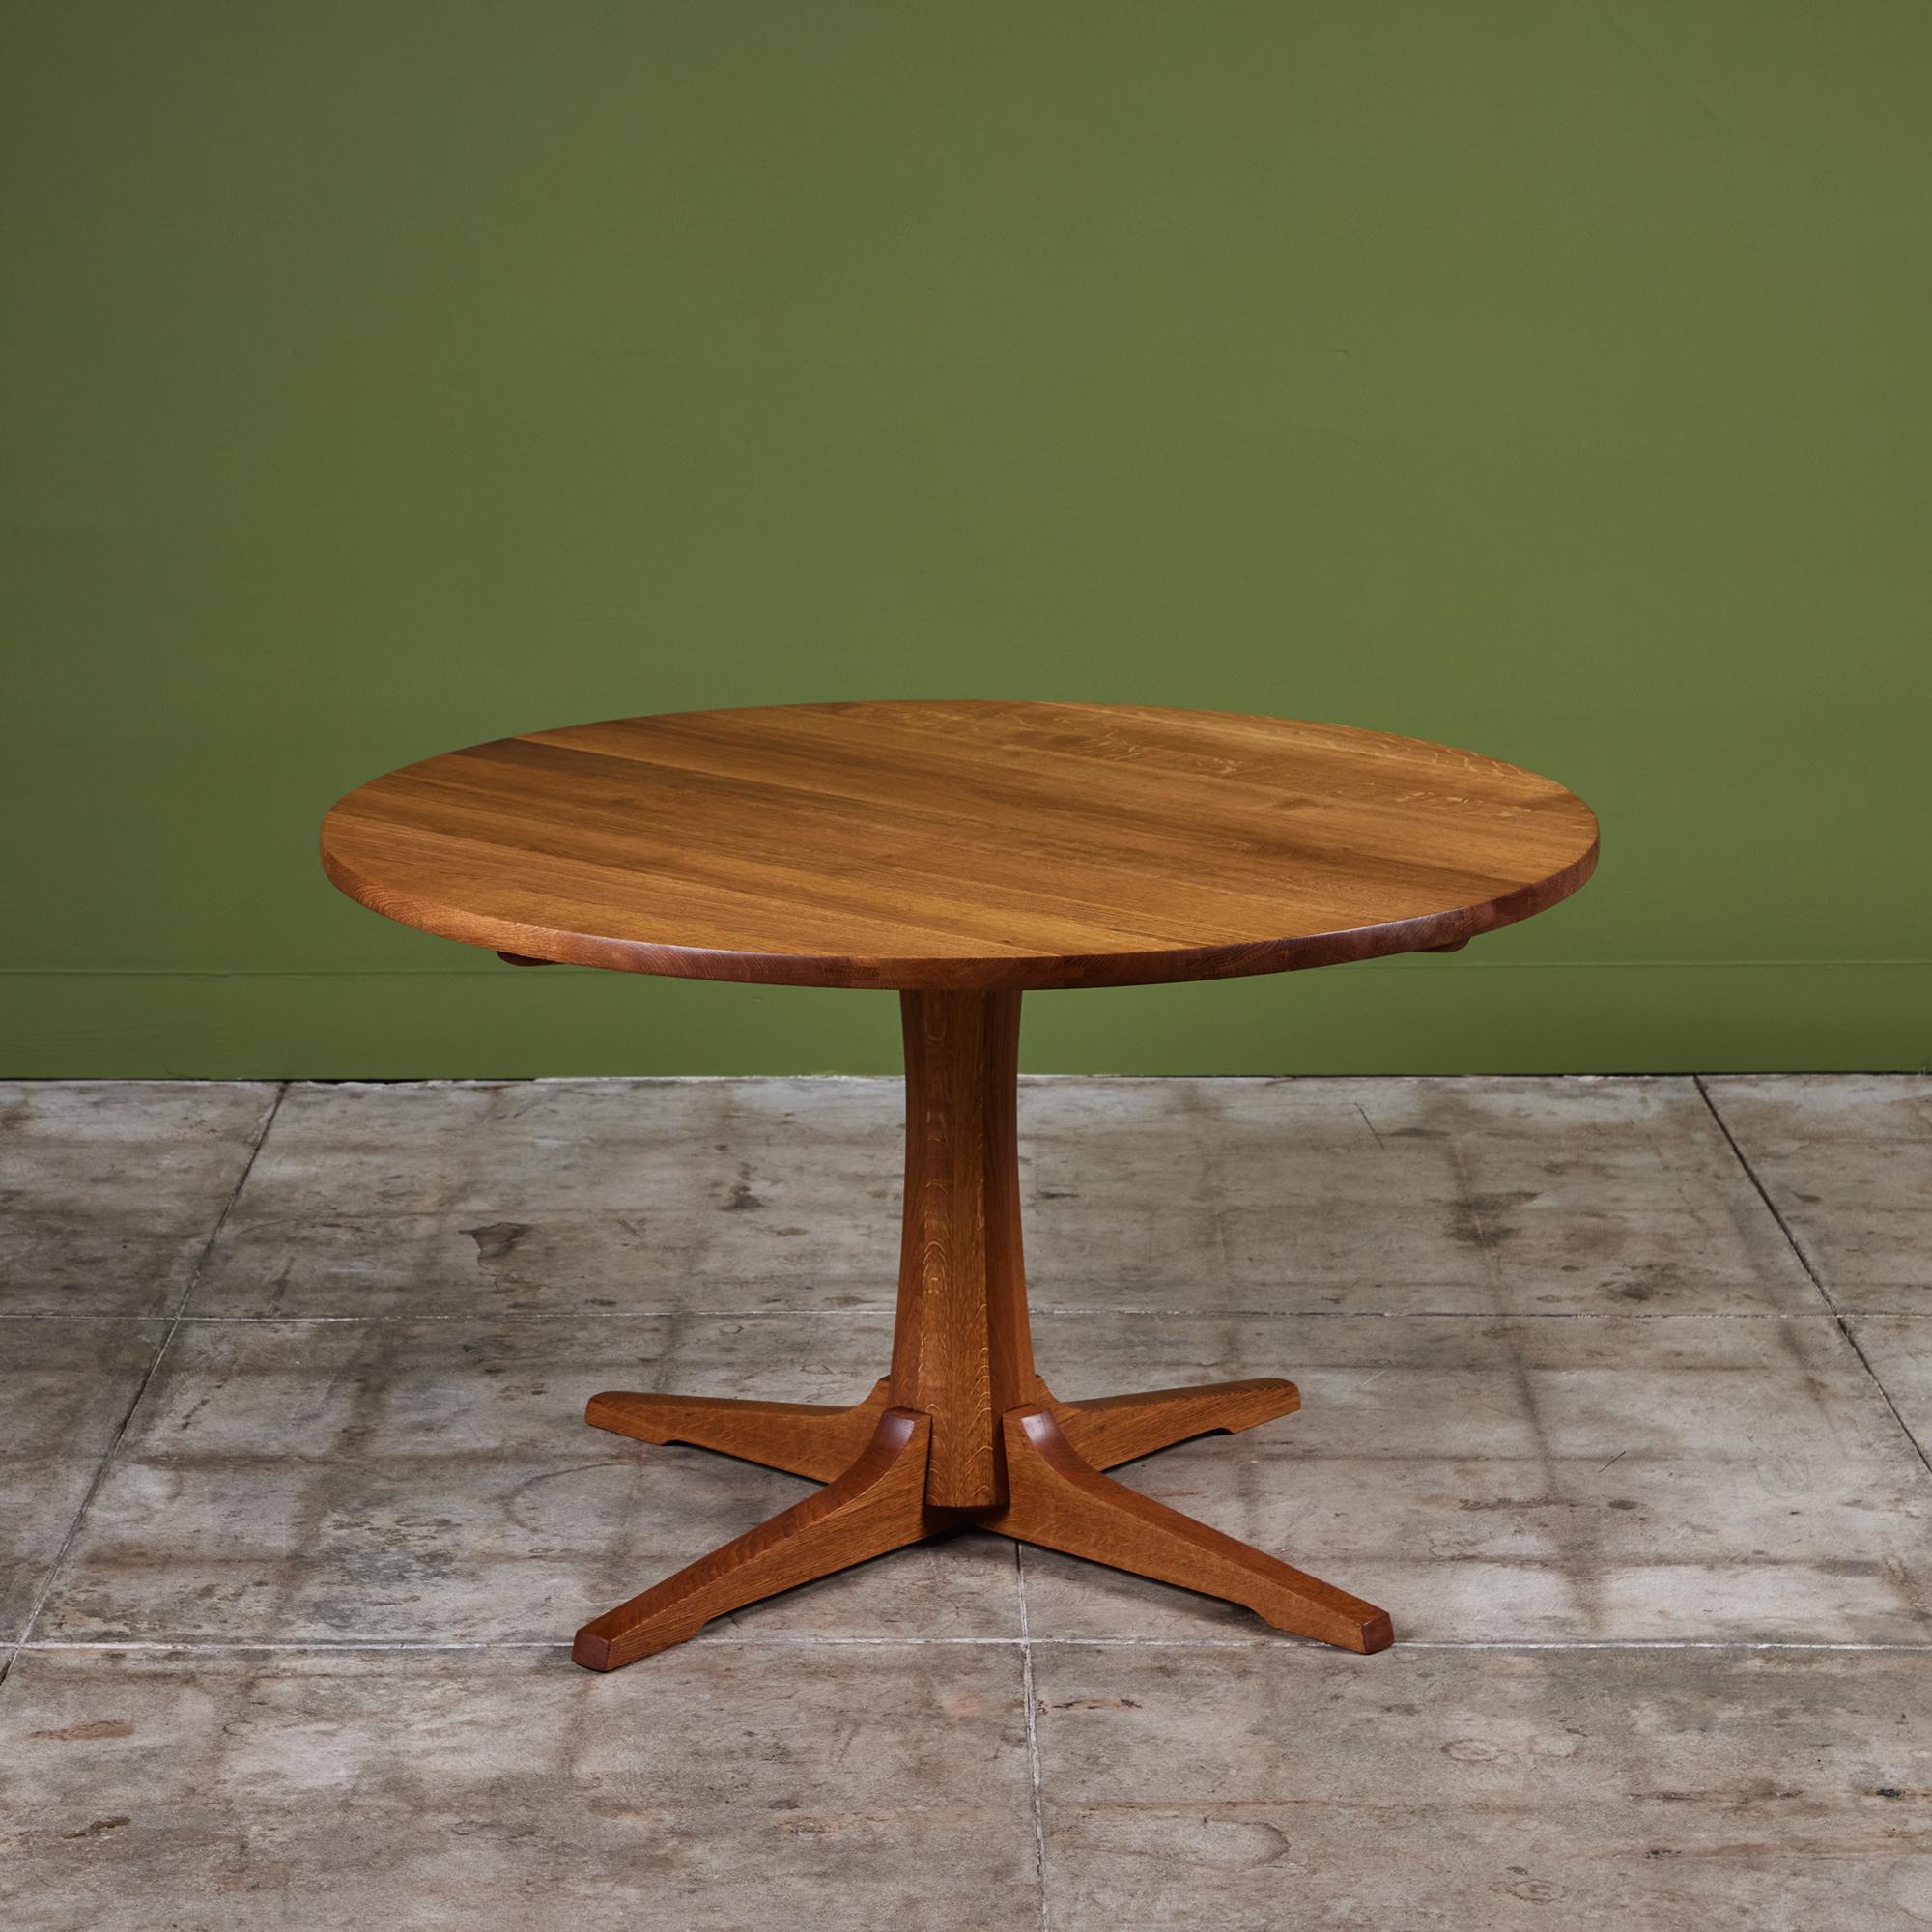 Dining table by Jens H. Quistgaard for Nissen, c.1960s Denmark features a hand-oiled round table top and pedestal base all comprised of solid oak. The table can comfortably seat four to six.

Dimensions 
47